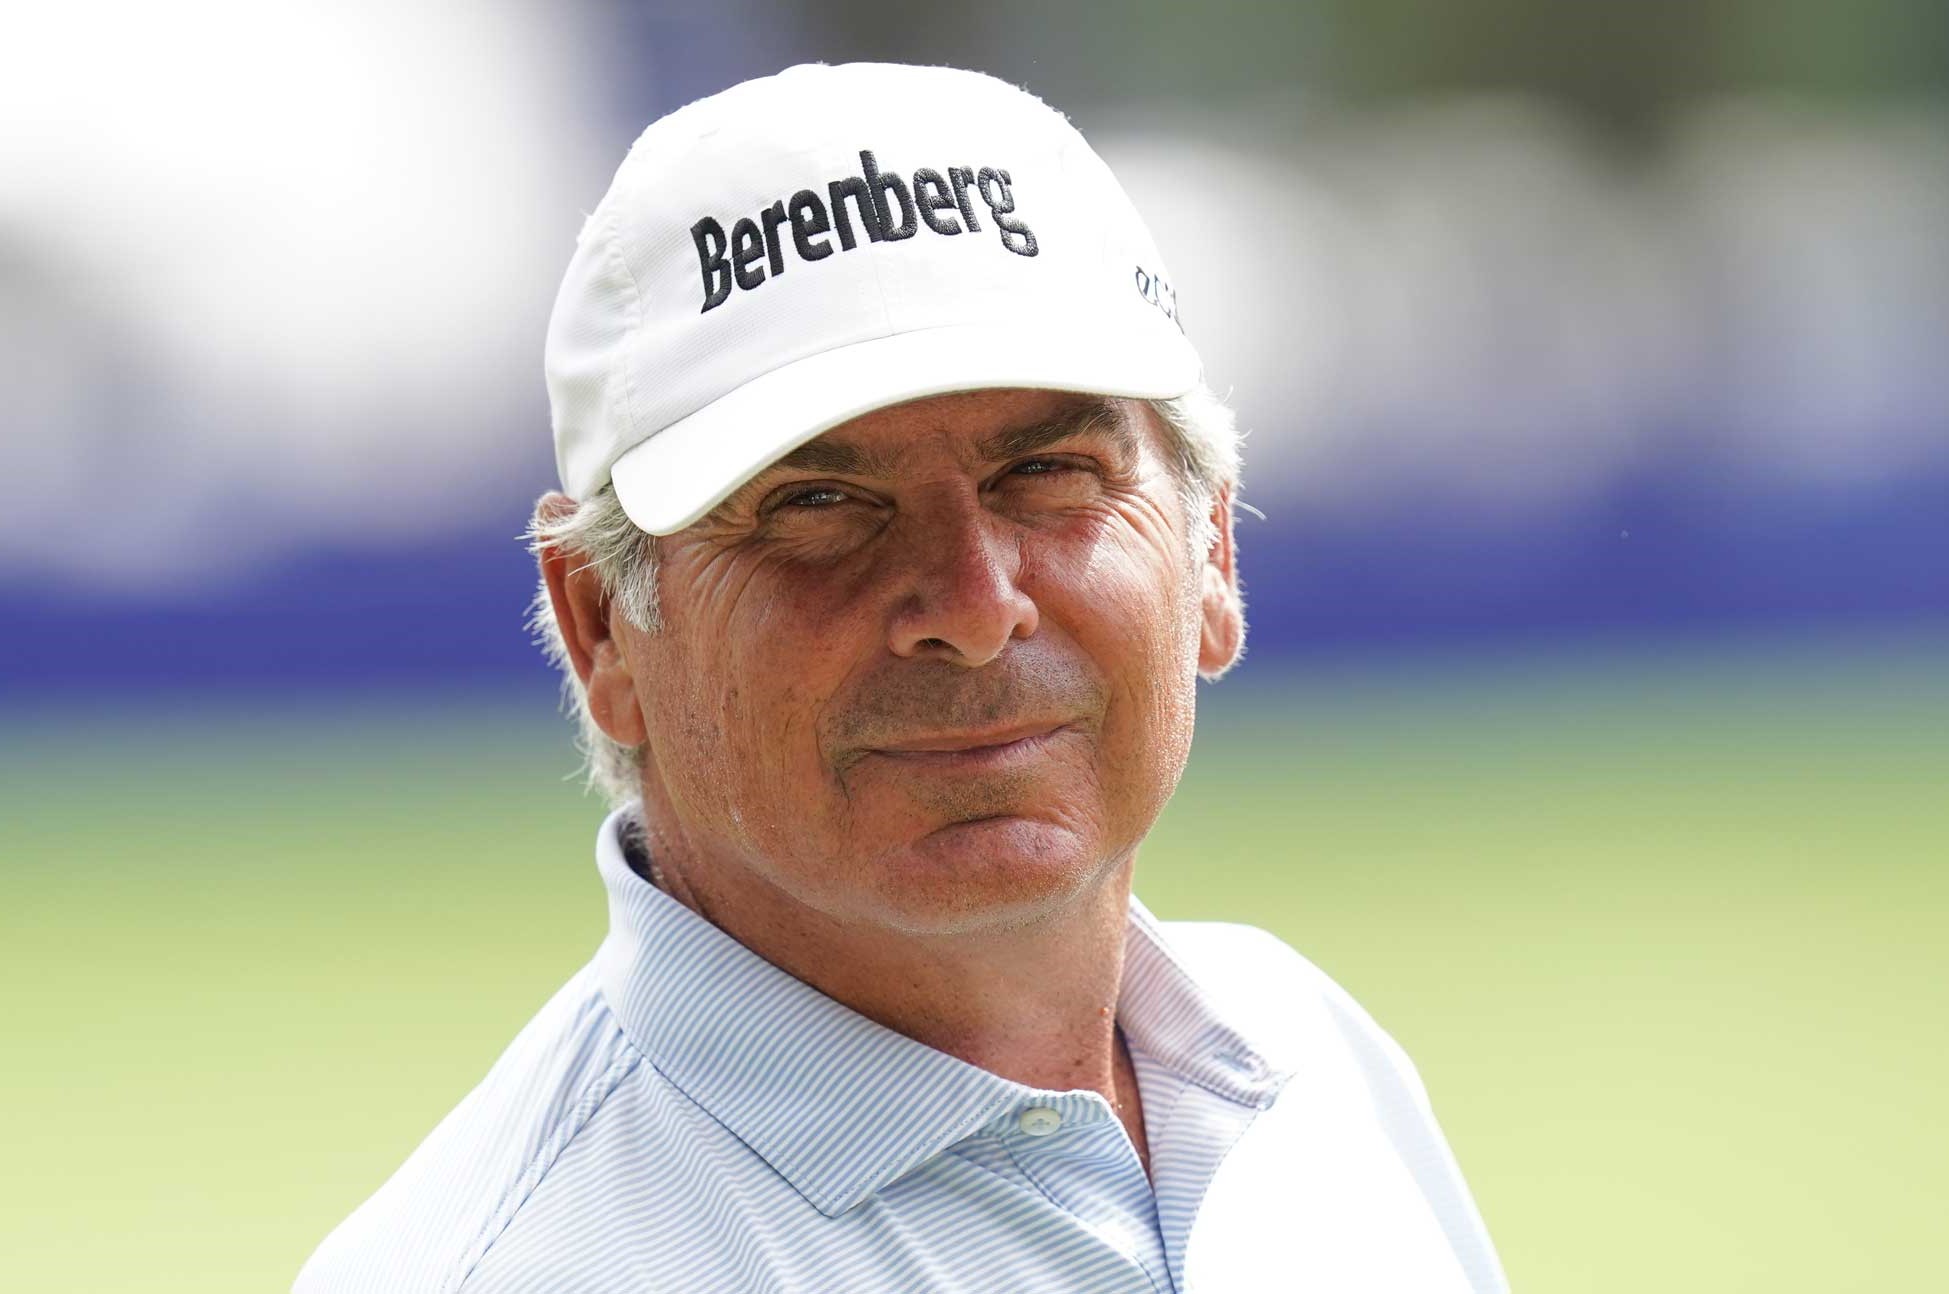 18-astounding-facts-about-fred-couples